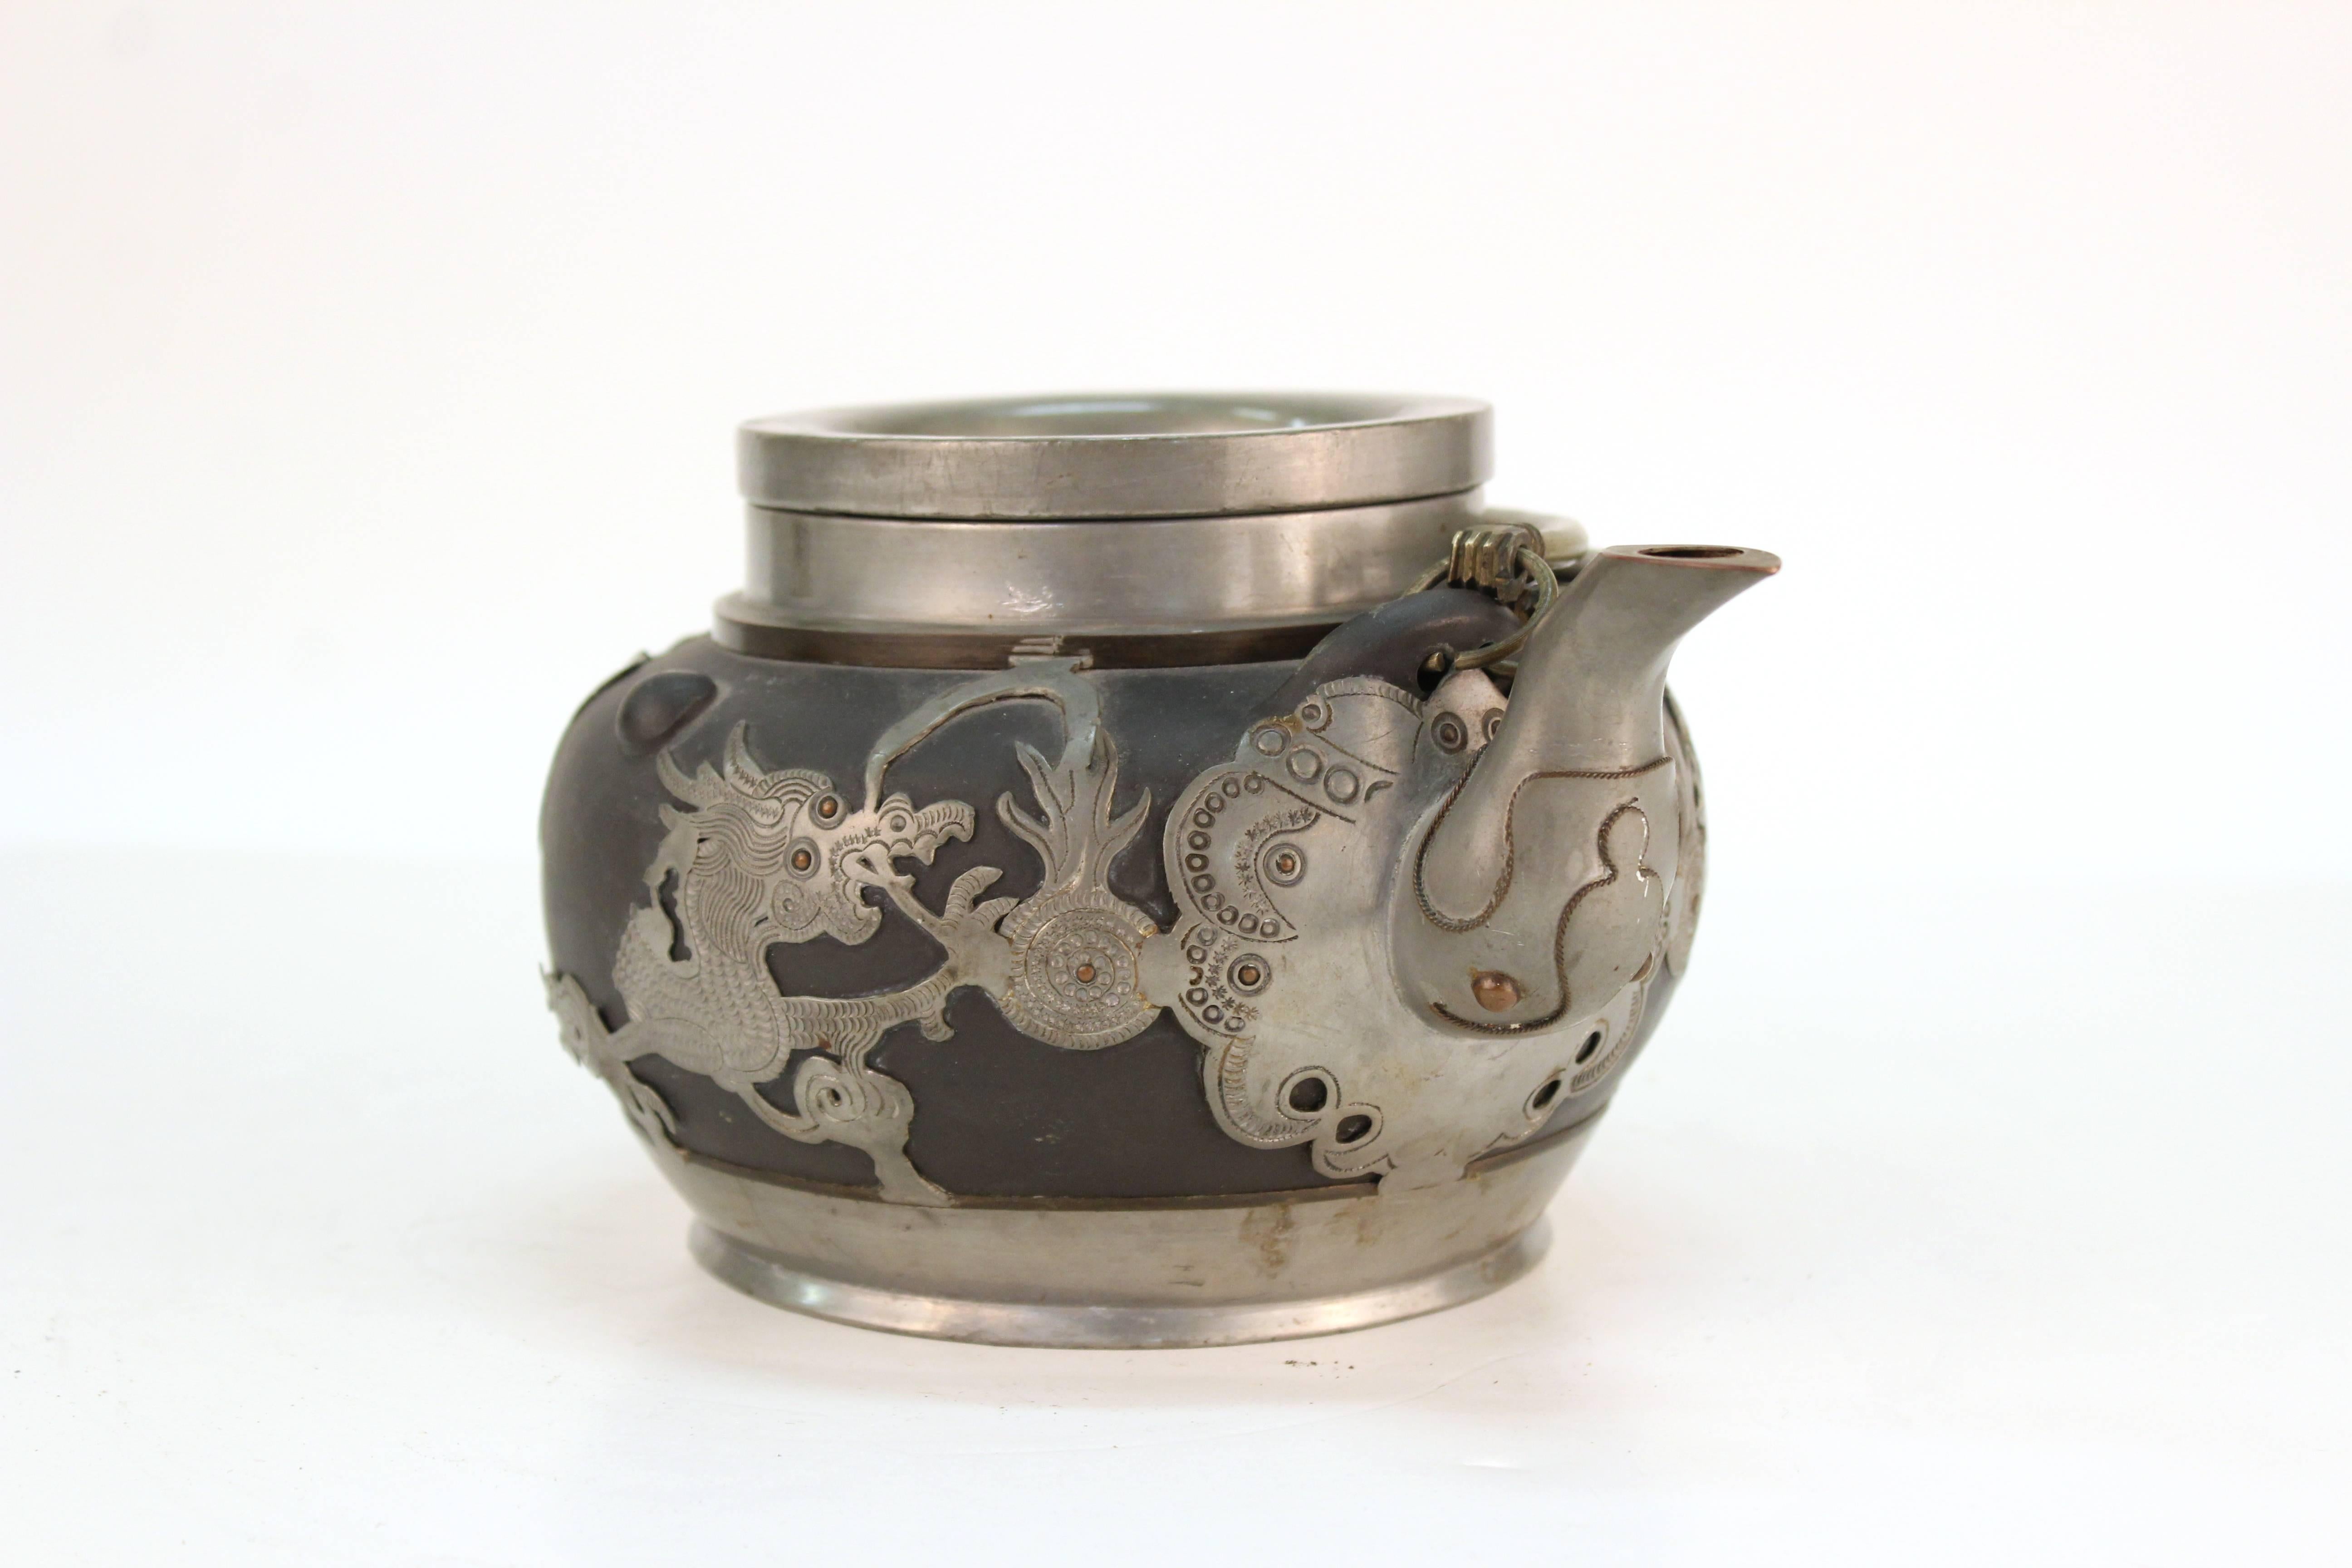 Chinese antique earthenware and pewter teapot, with dragon motif and metal handles. The piece is stamped illegibly on the bottom and is in good vintage condition.